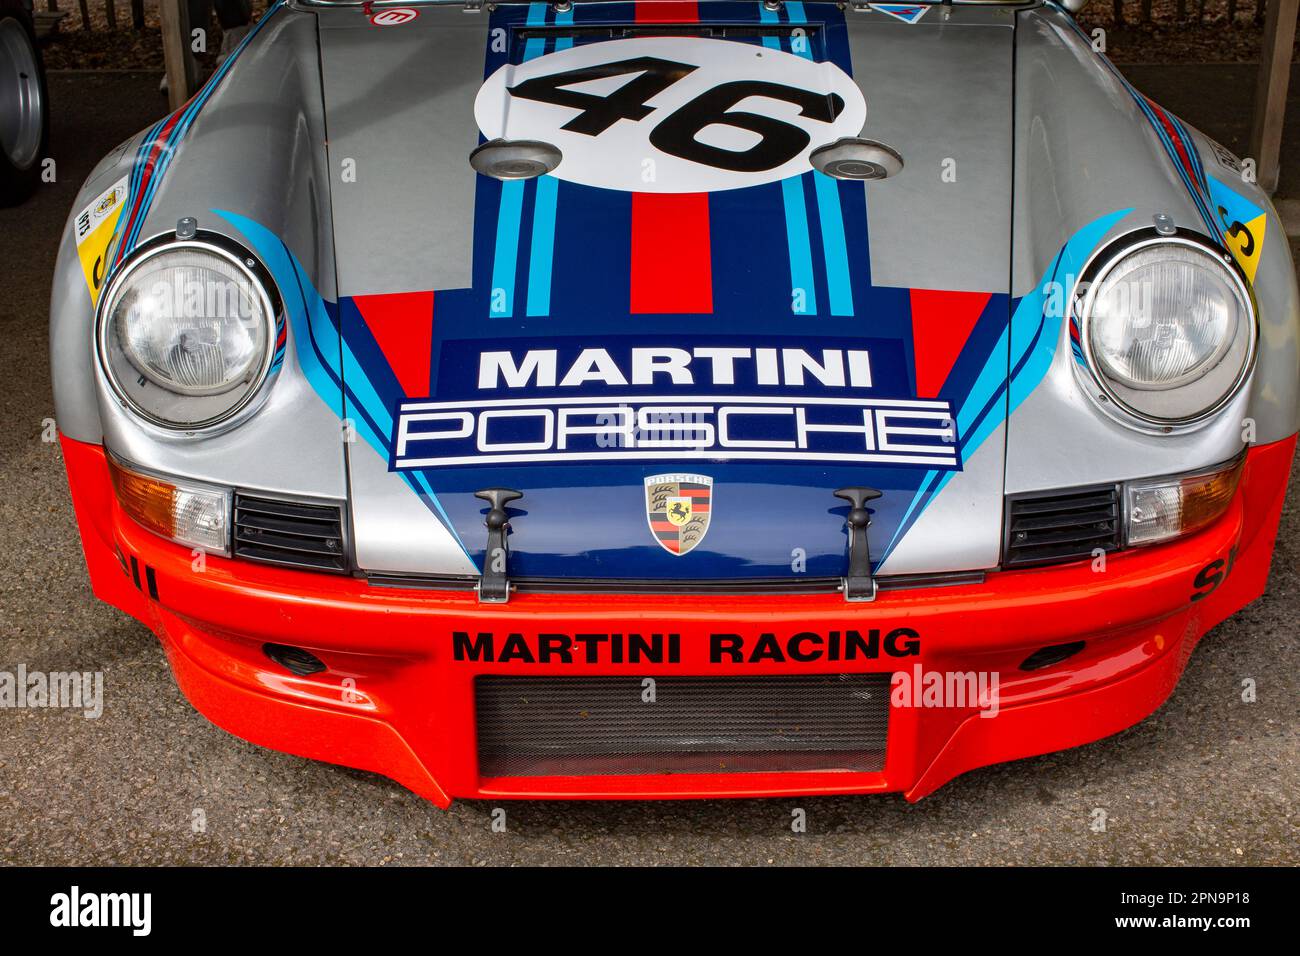 Martini Porsche at Members' Meeting at Goodwood Motor Circuit in West Sussex,United Kingdom. Stock Photo